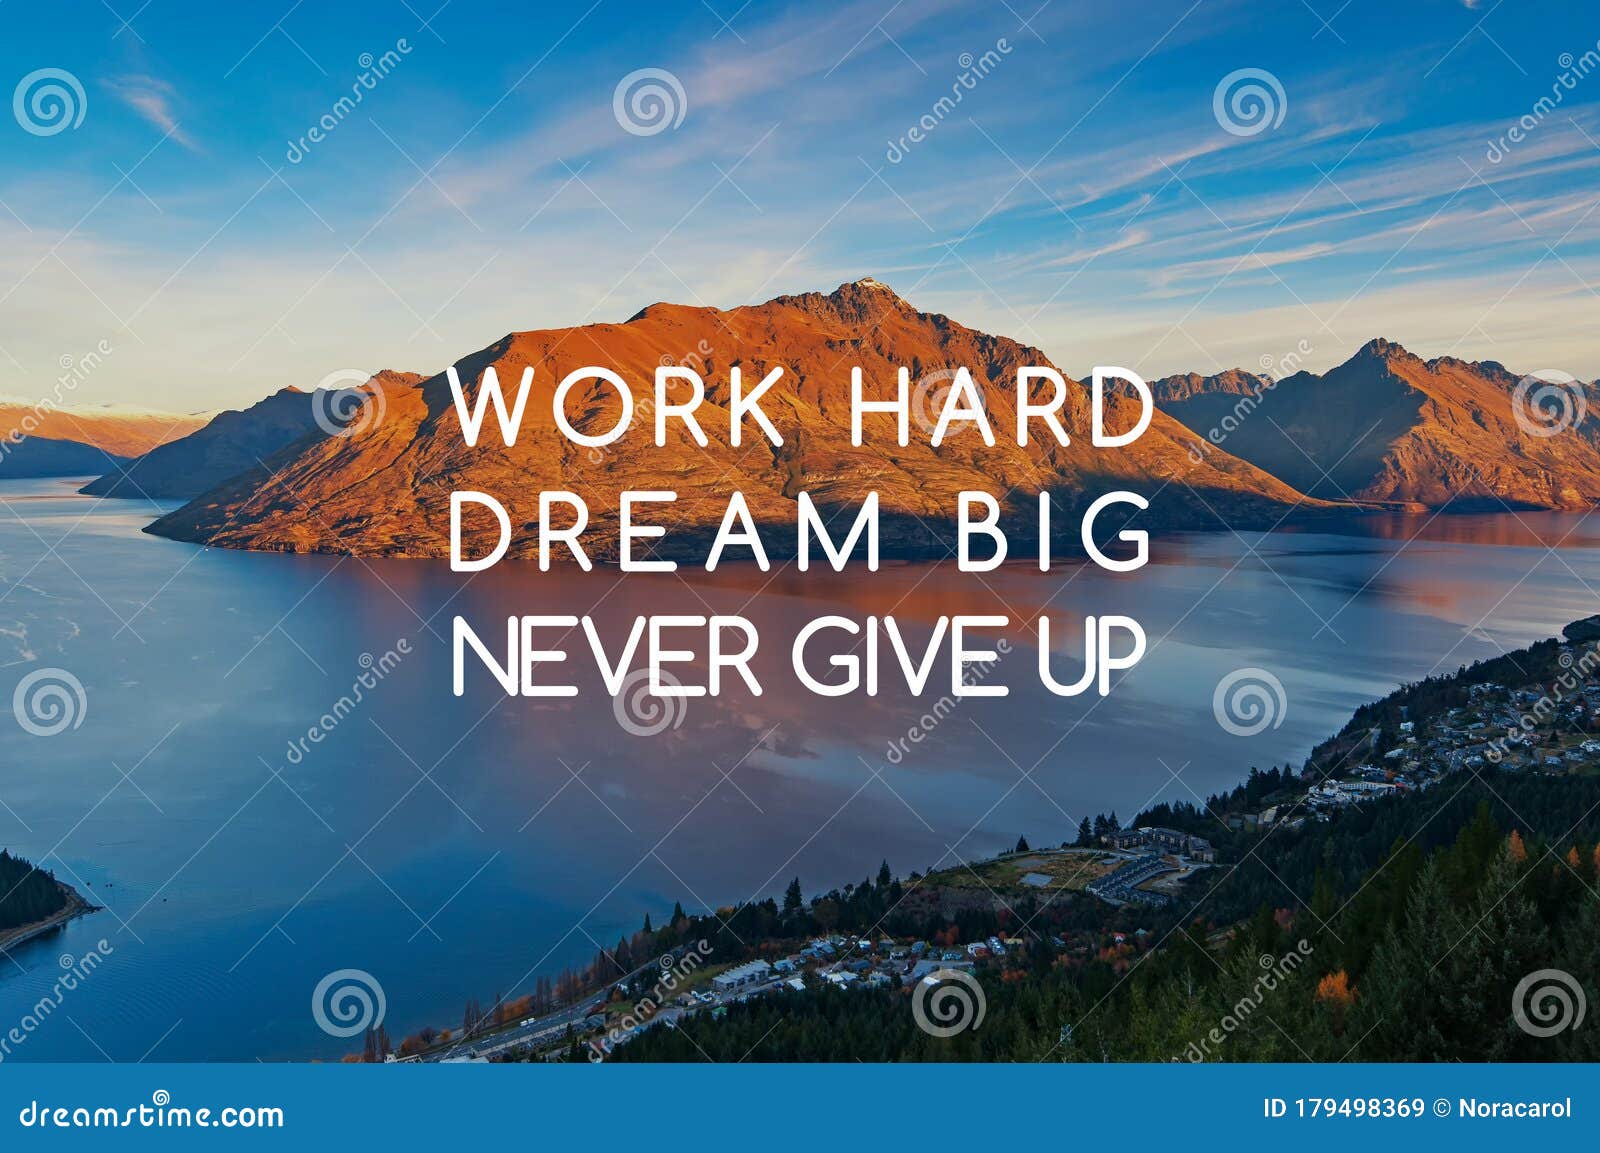 life quotes - work hard, dream big, never give up